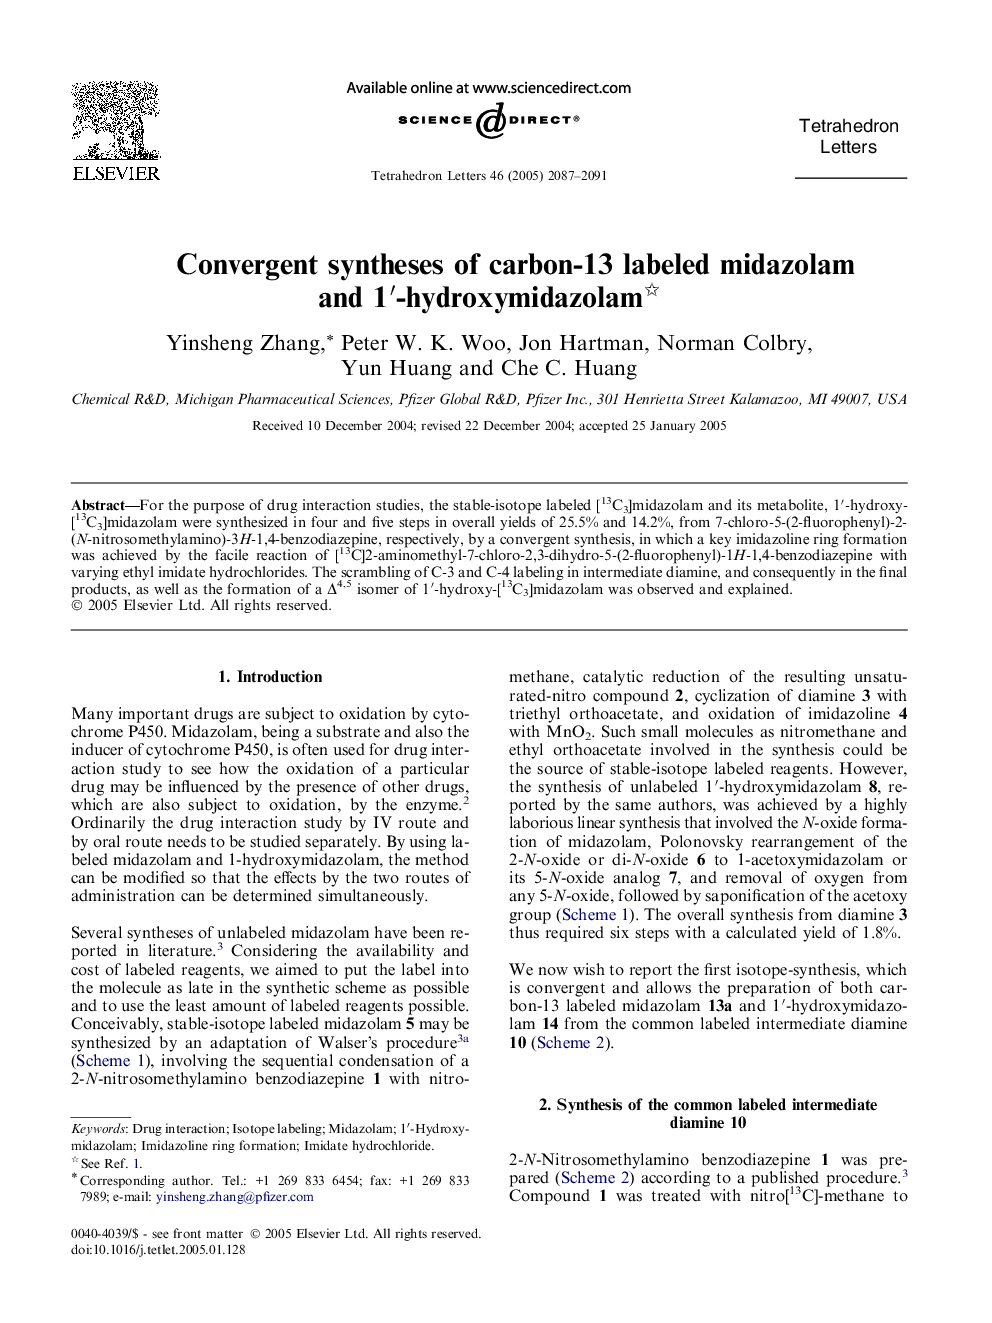 Convergent syntheses of carbon-13 labeled midazolam and 1â²-hydroxymidazolam